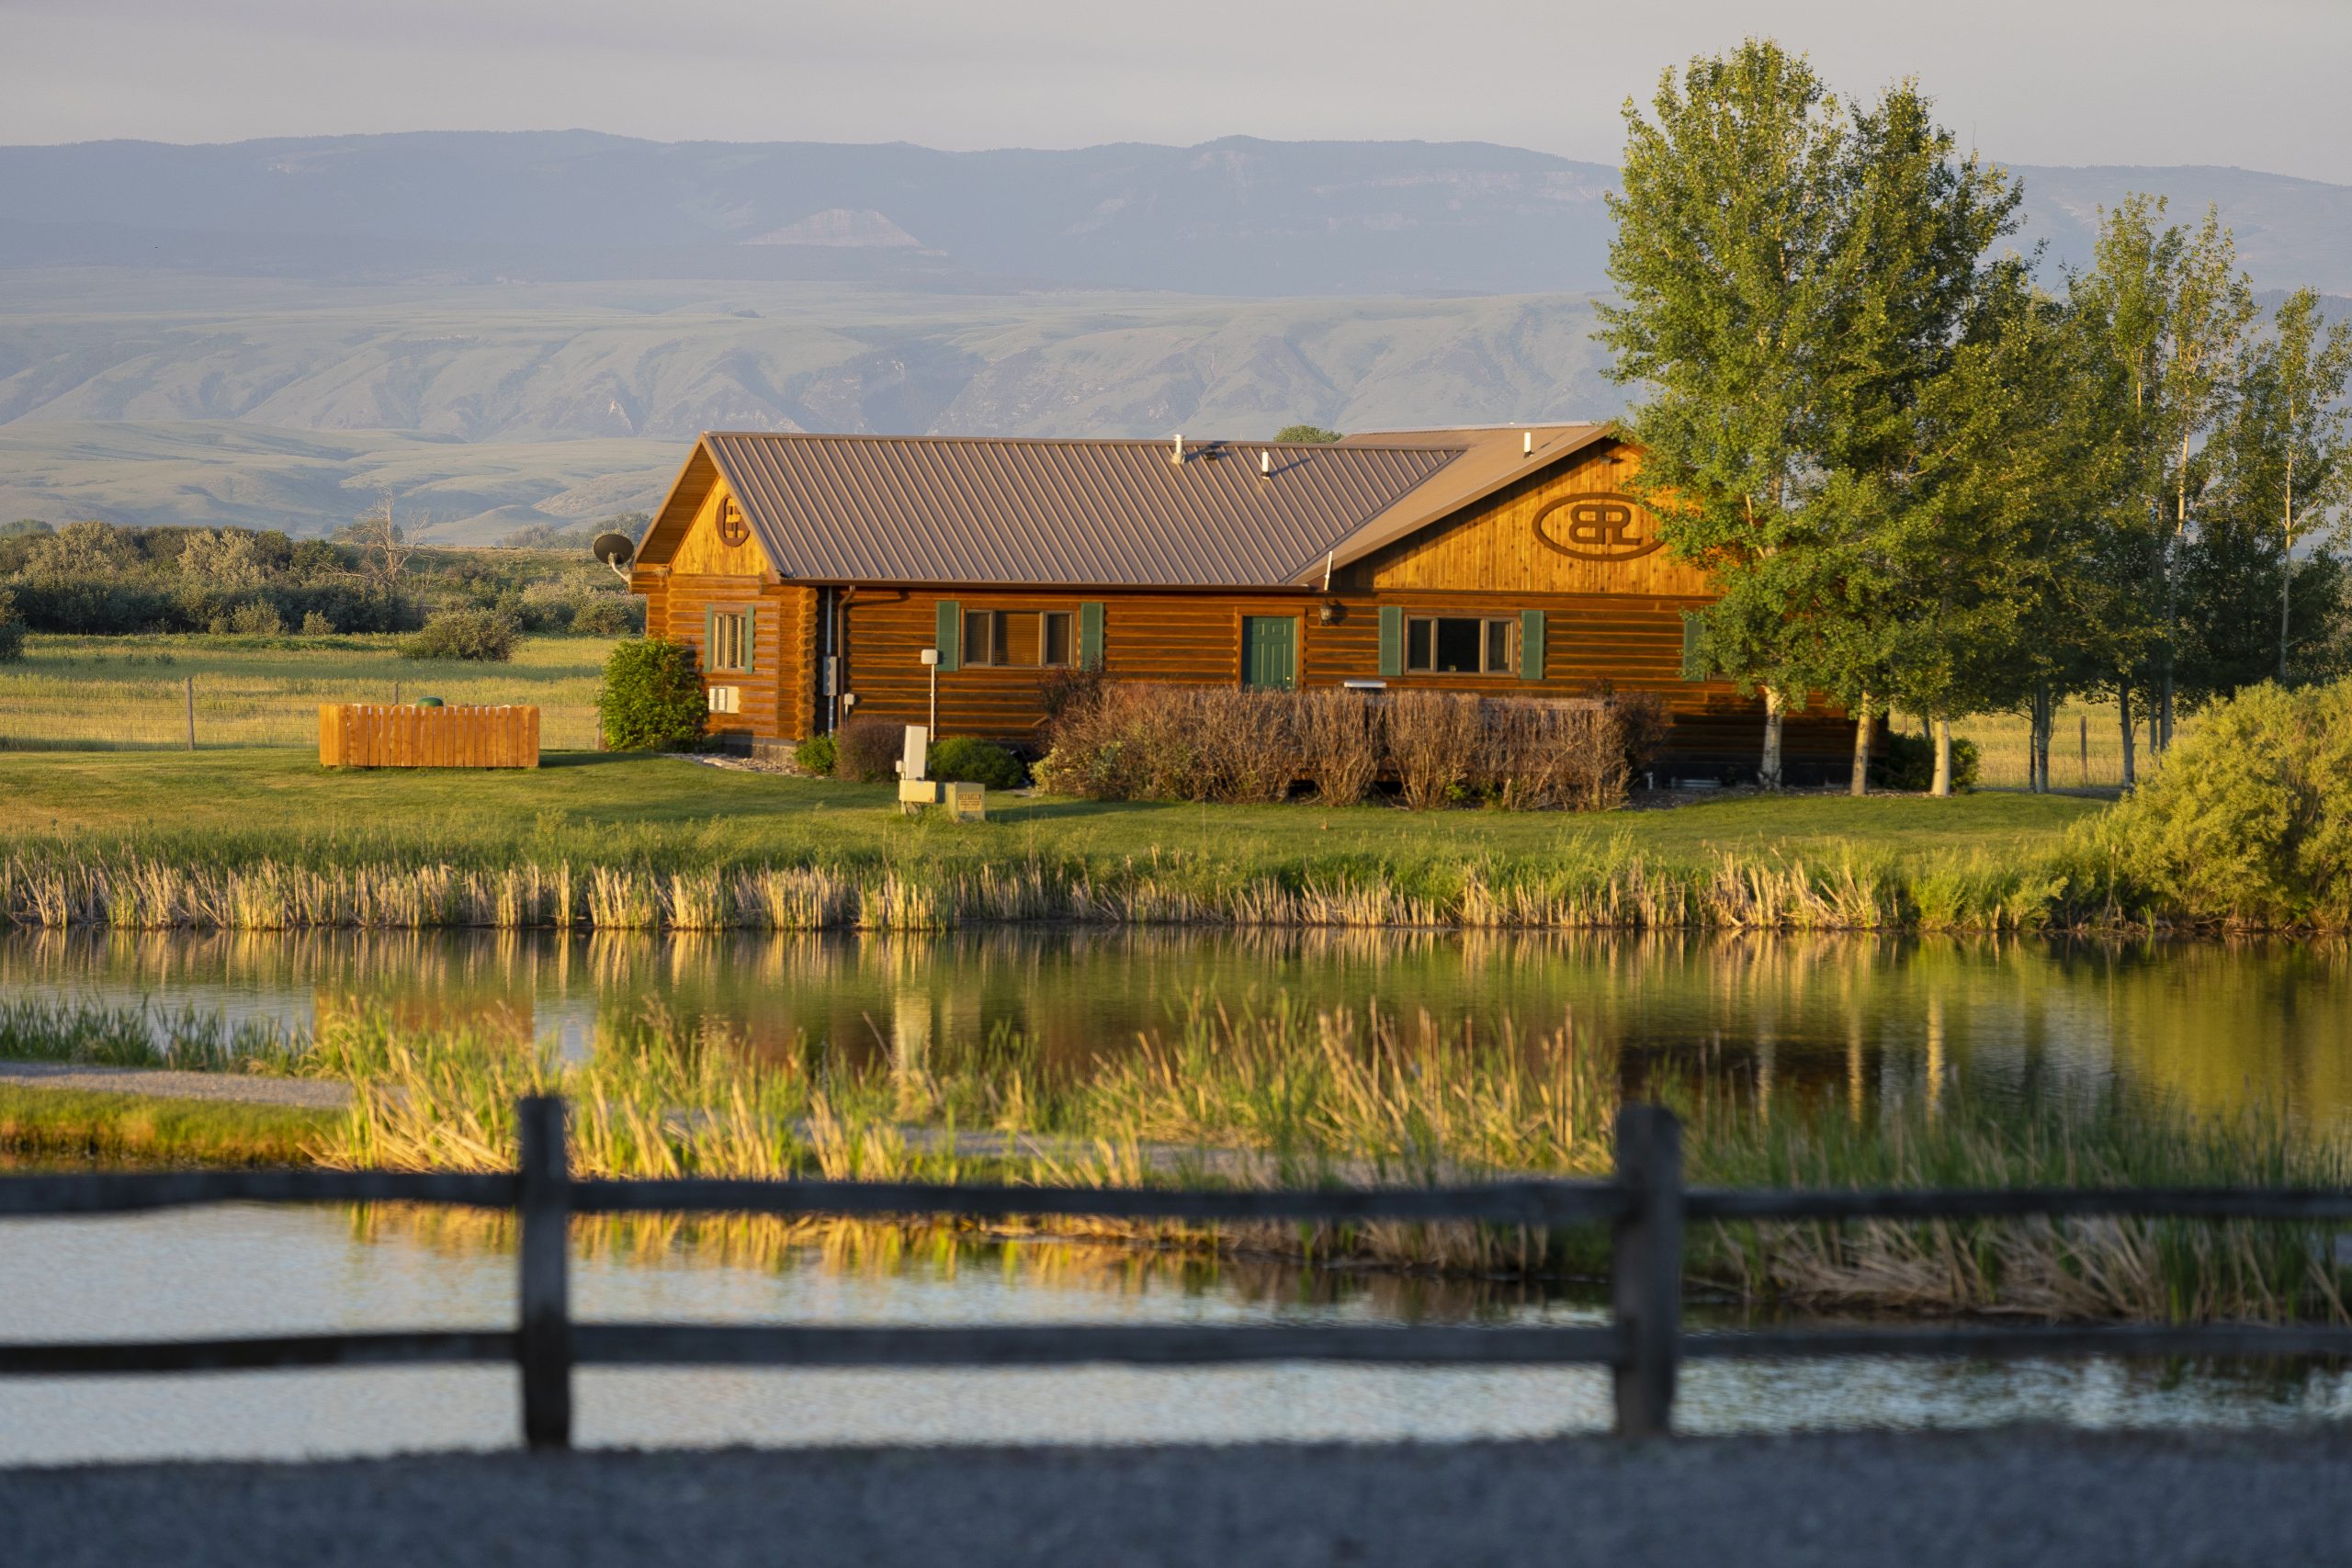 Ultimate Fly Fishing Destination is the Bighorn River in Montana